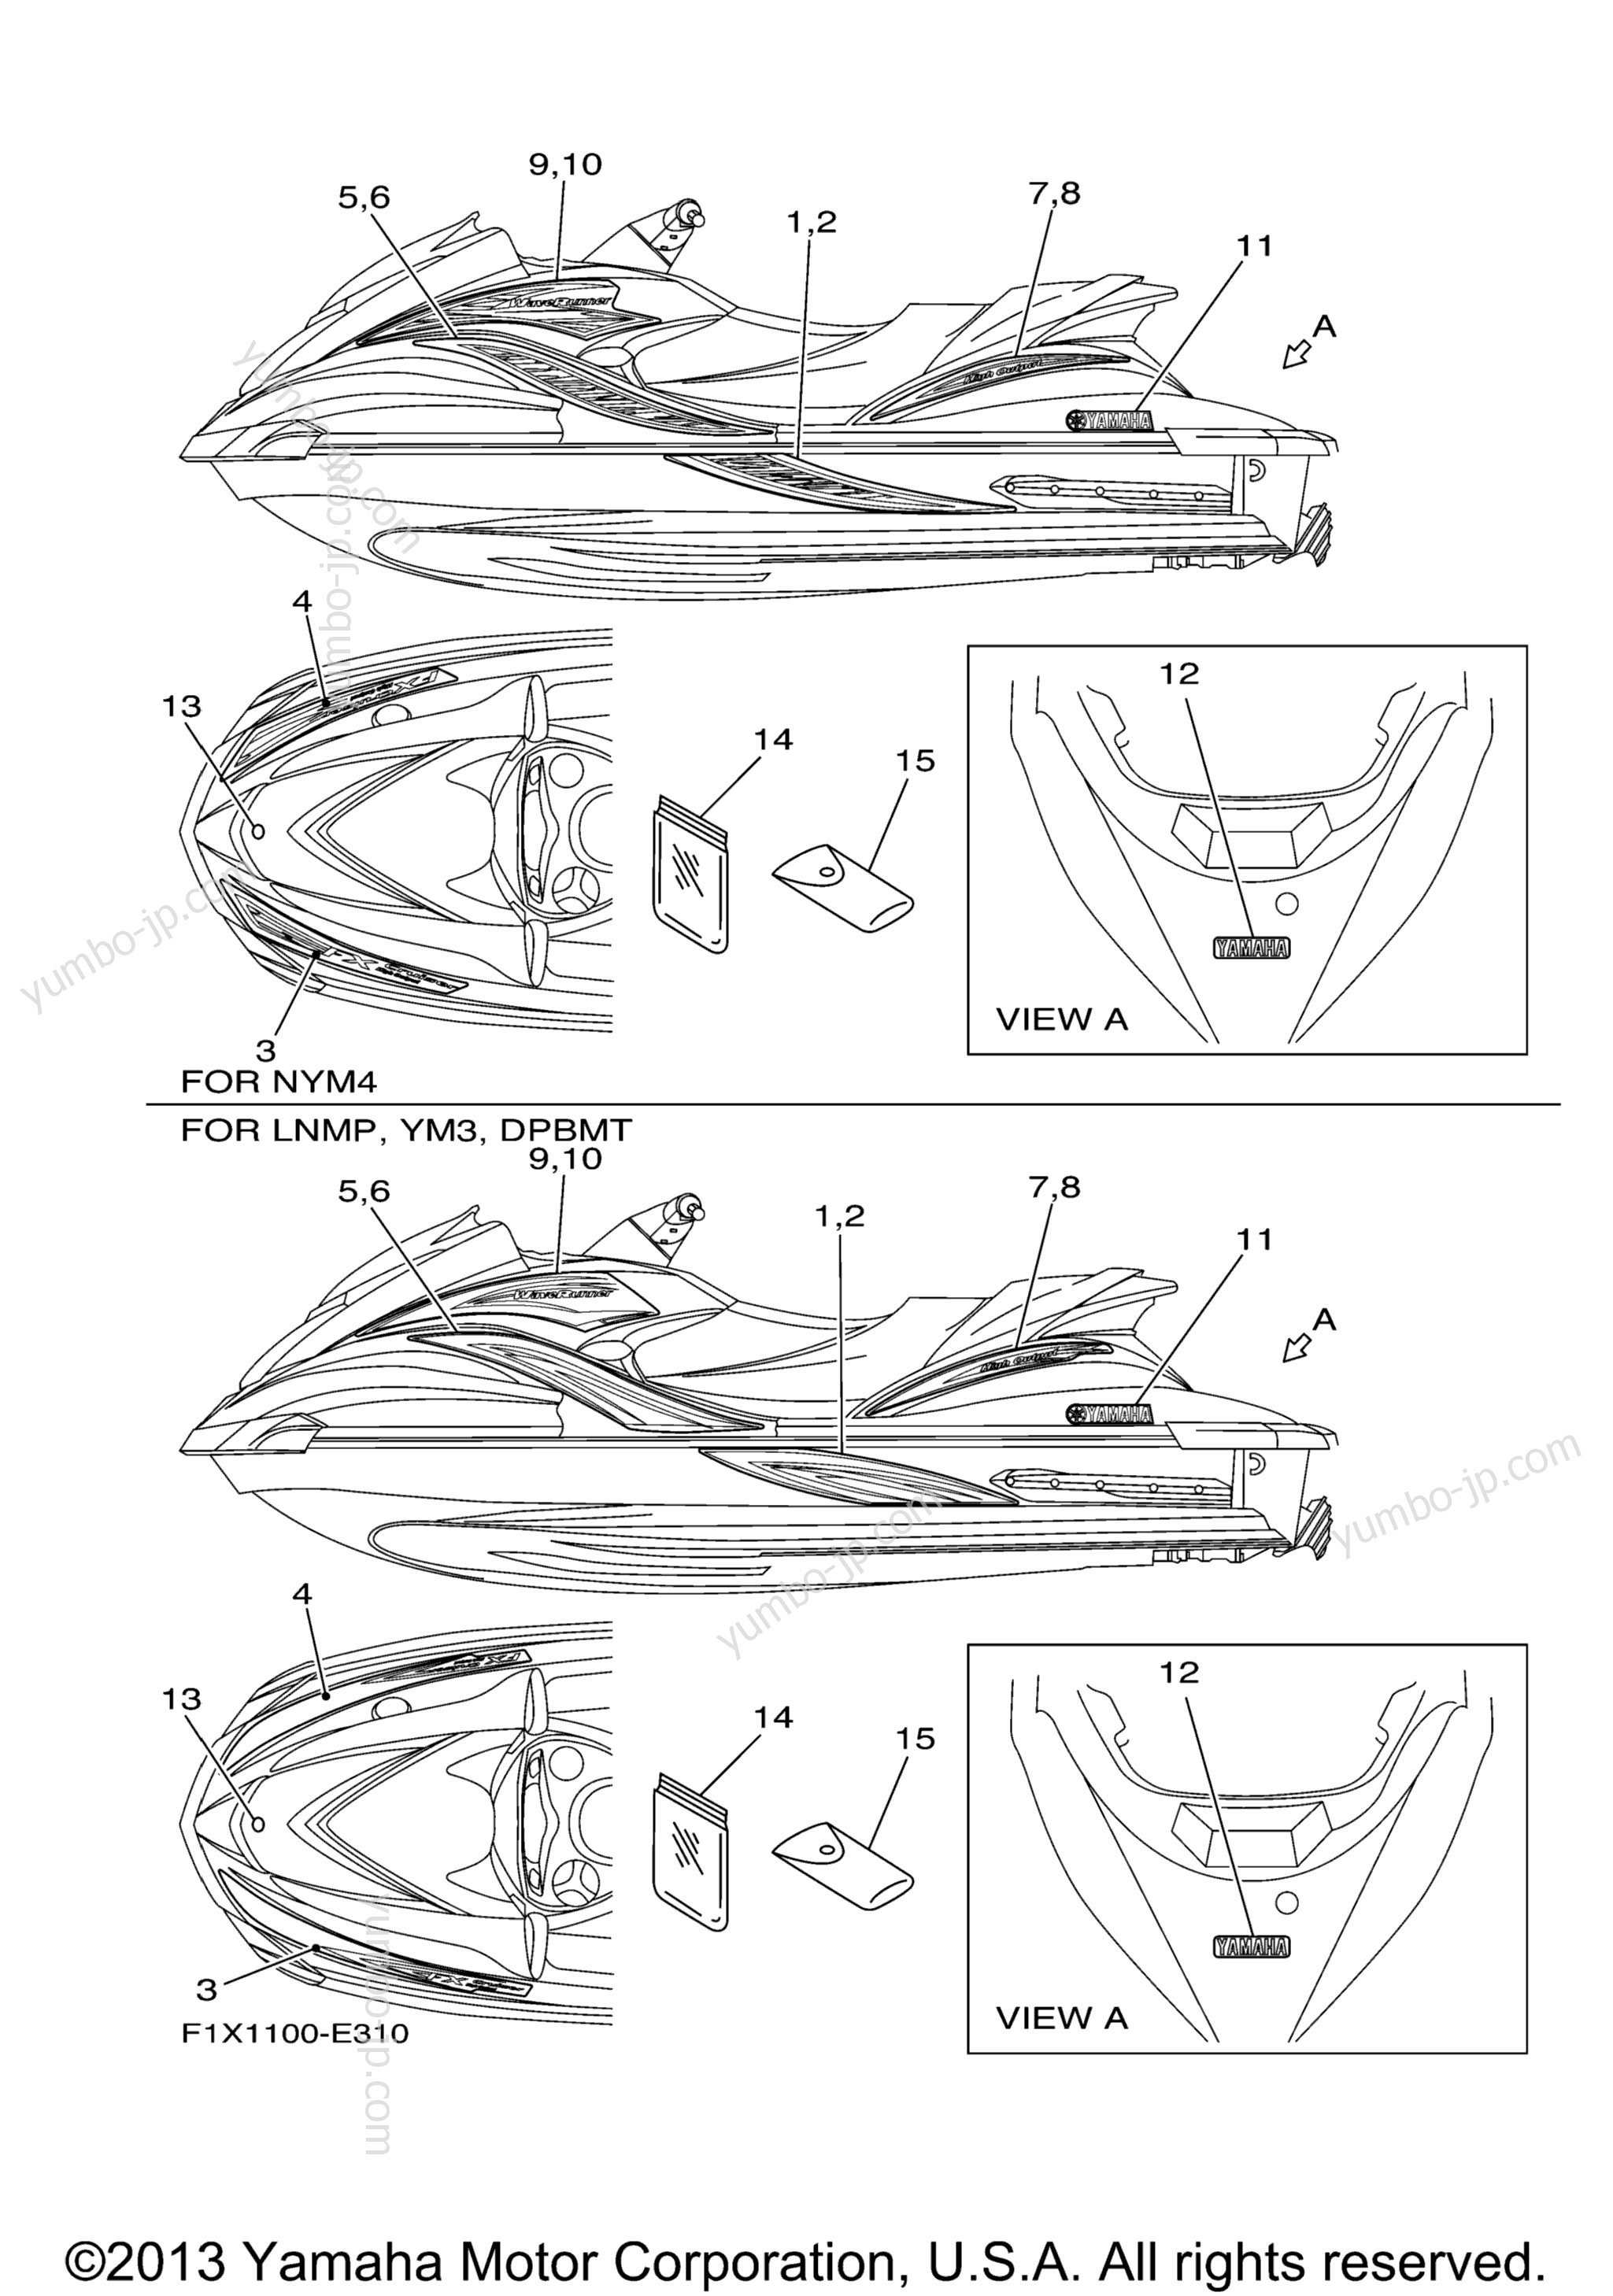 Graphics for watercrafts YAMAHA FX Cruiser High Output (FX1100AE) 2006 year